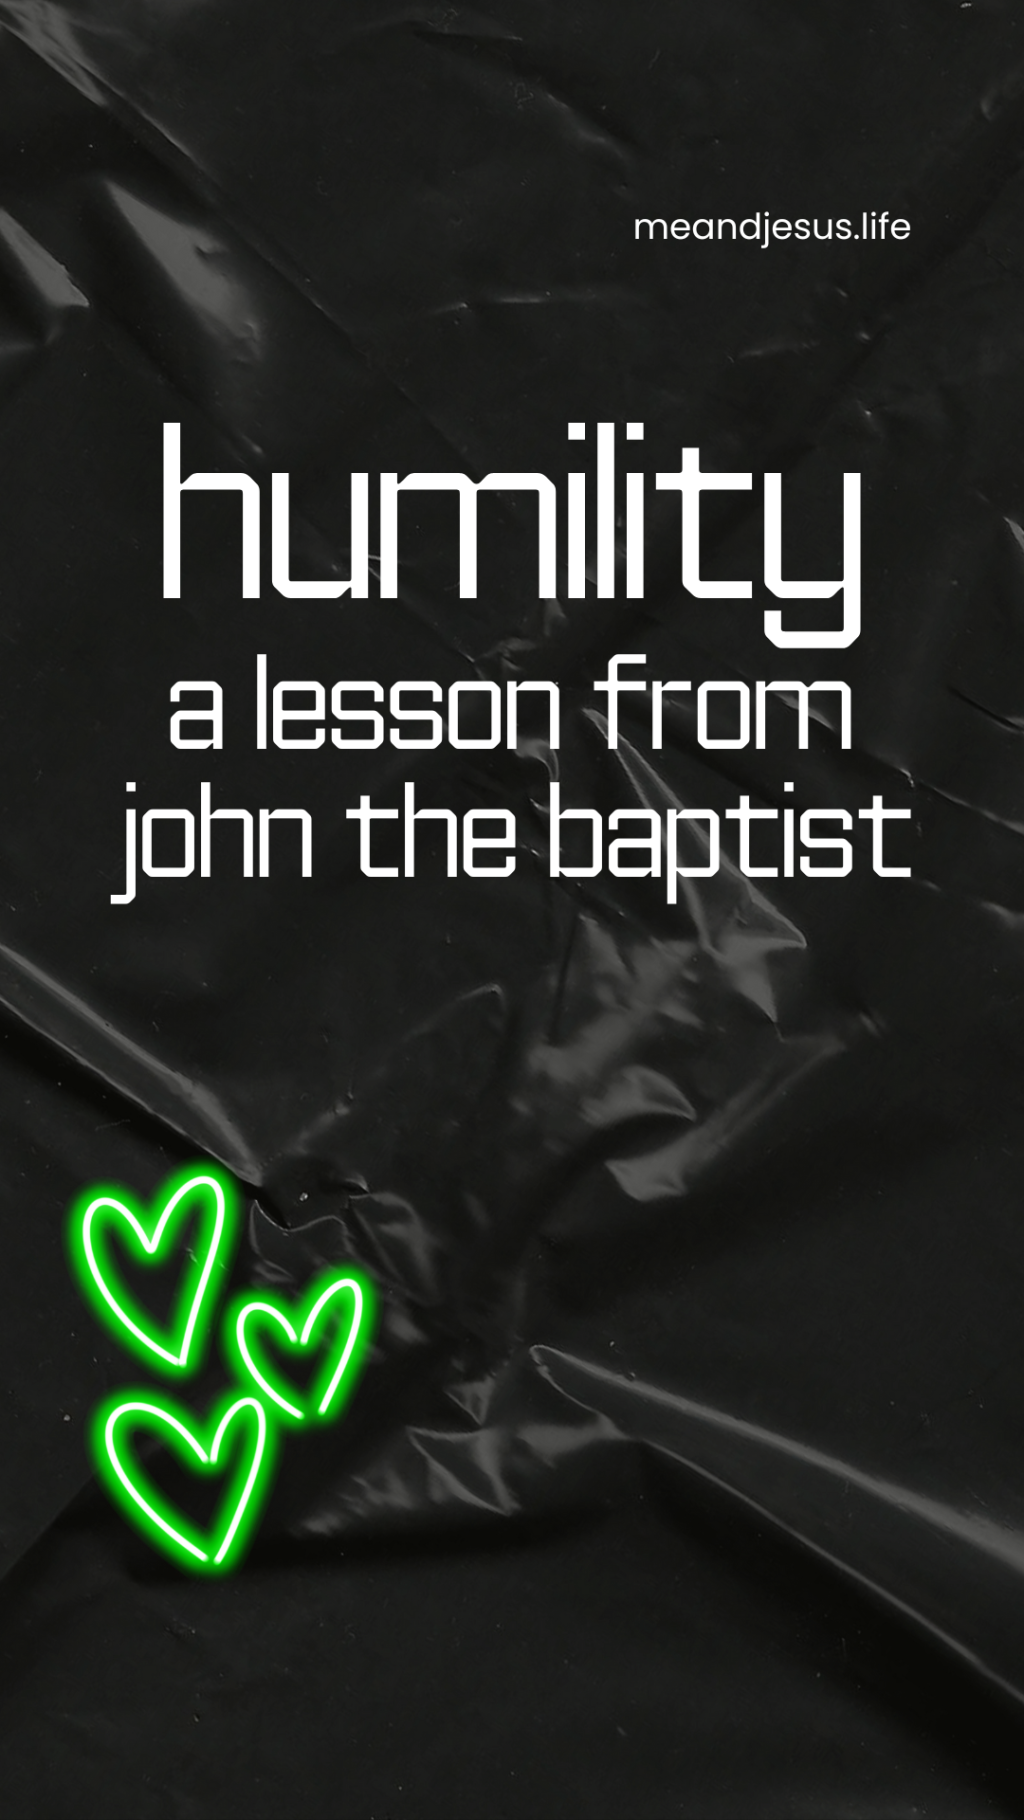 A Lesson on Humility – John the Baptist